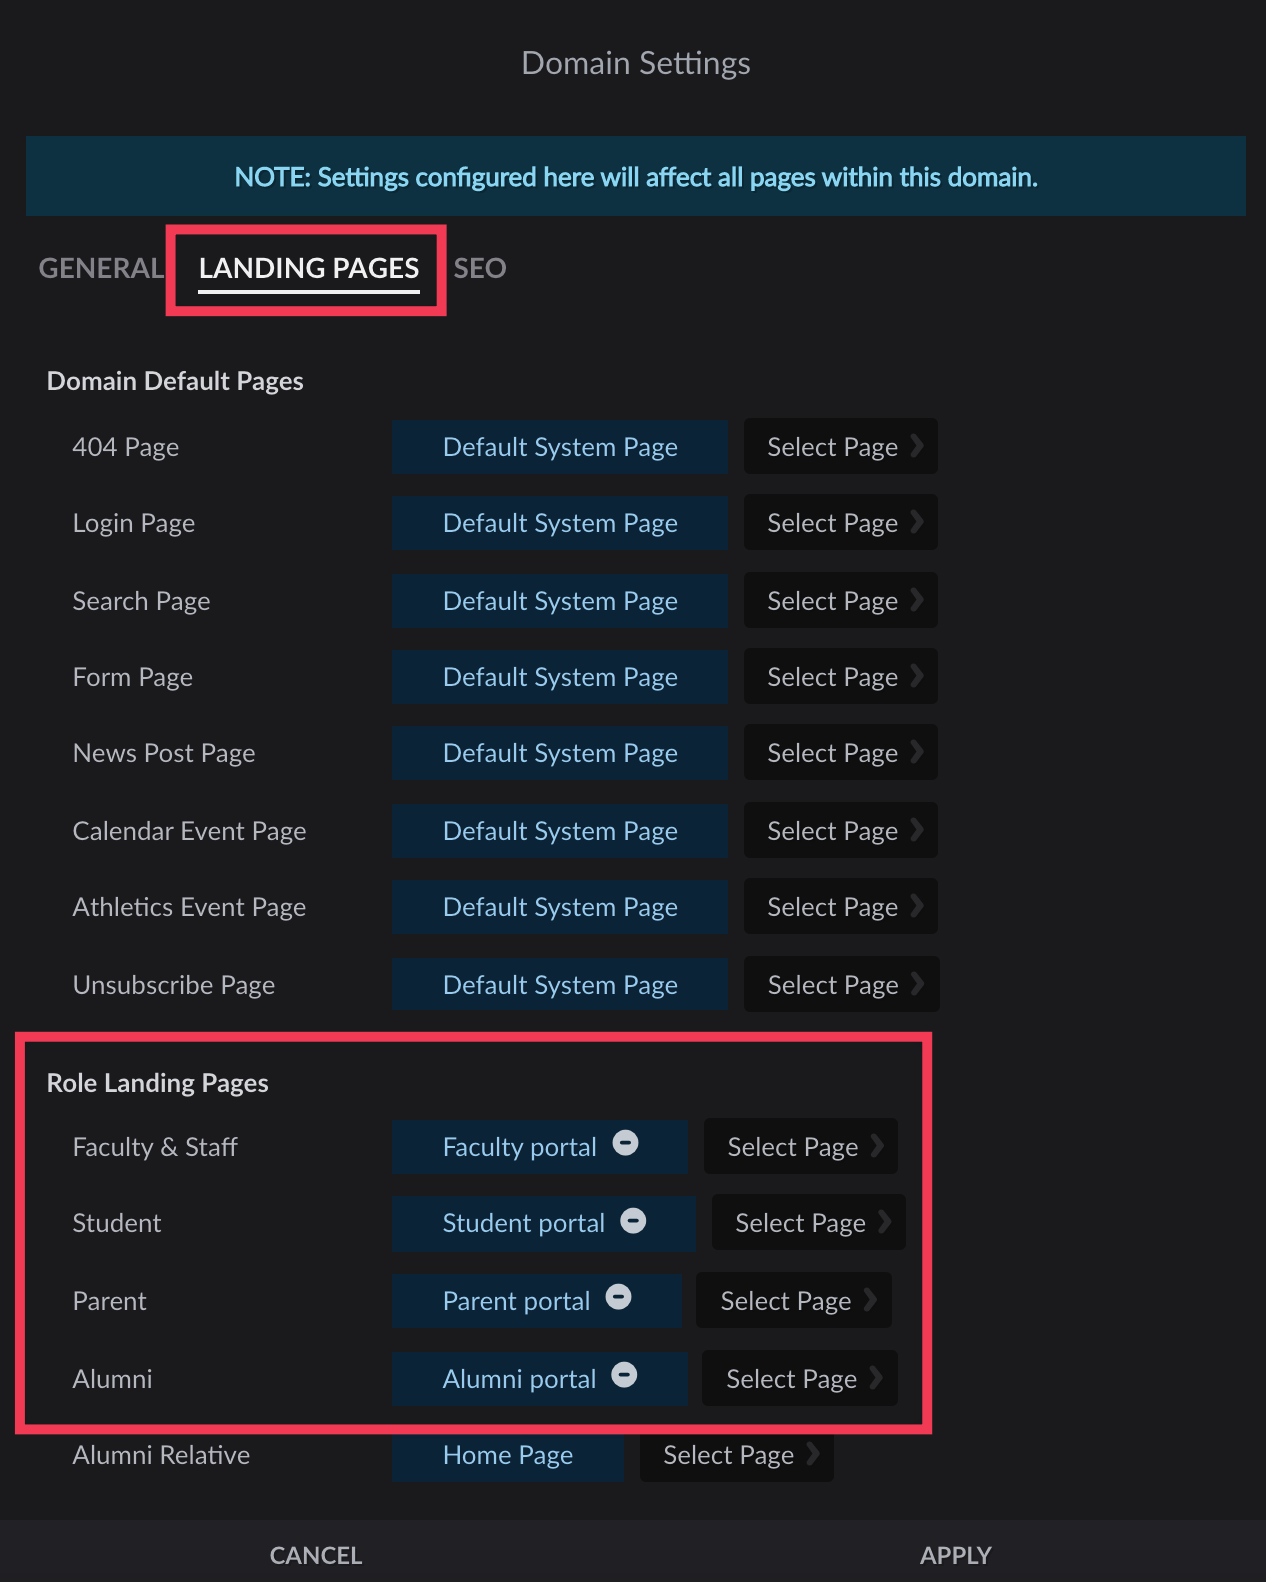 Domain Settings menu Landing Pages tab with Role Landing Pages section highlighted